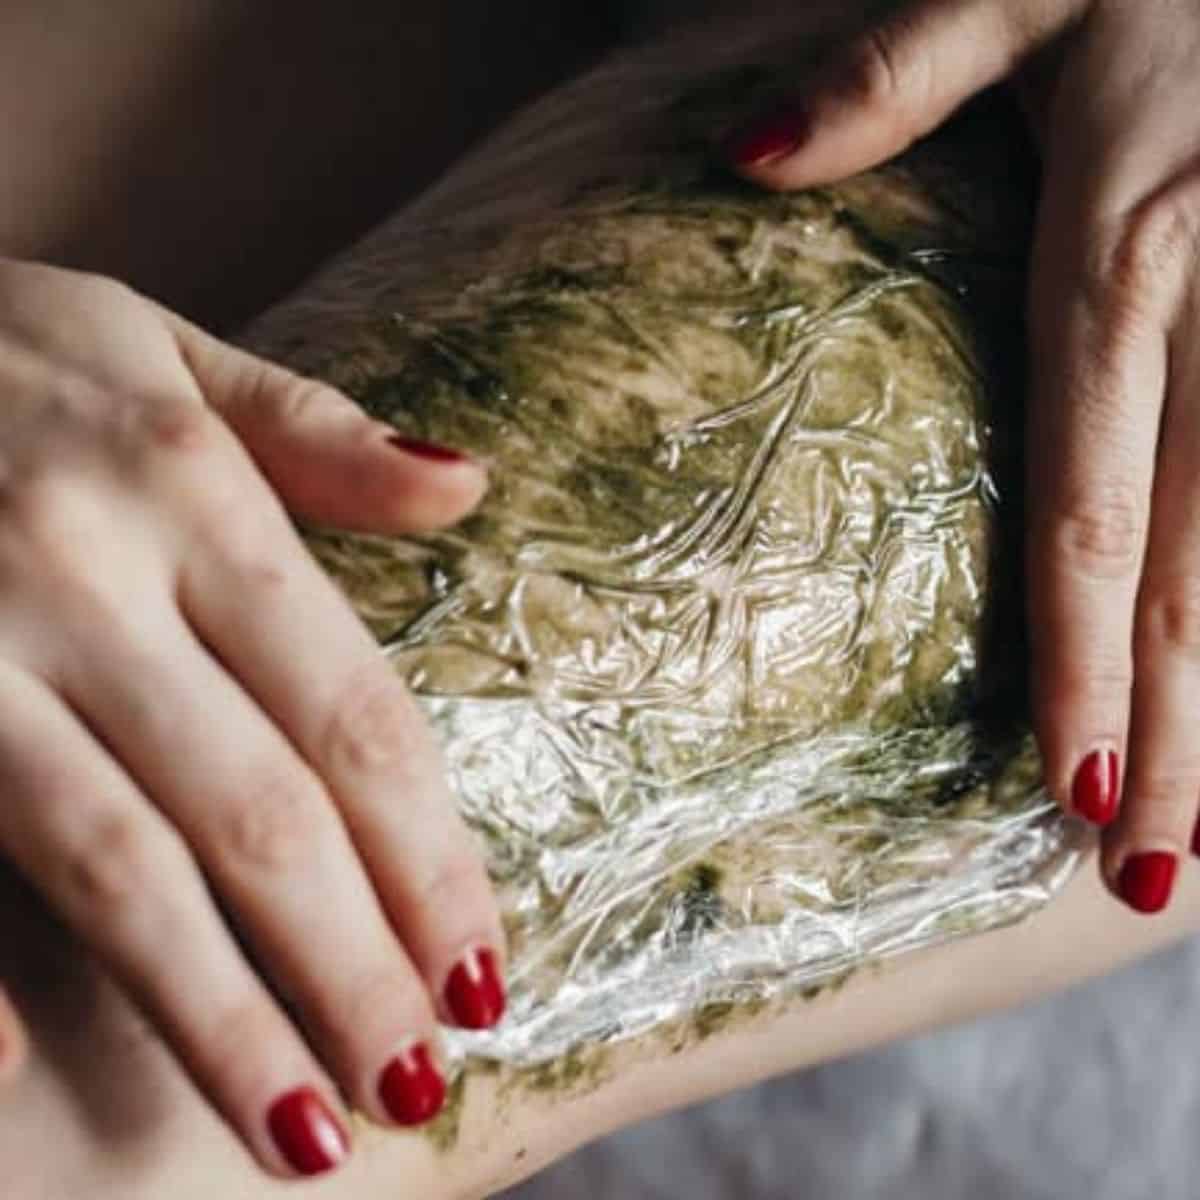 Bust Cellulite With A DIY Slimming Seaweed Wrap